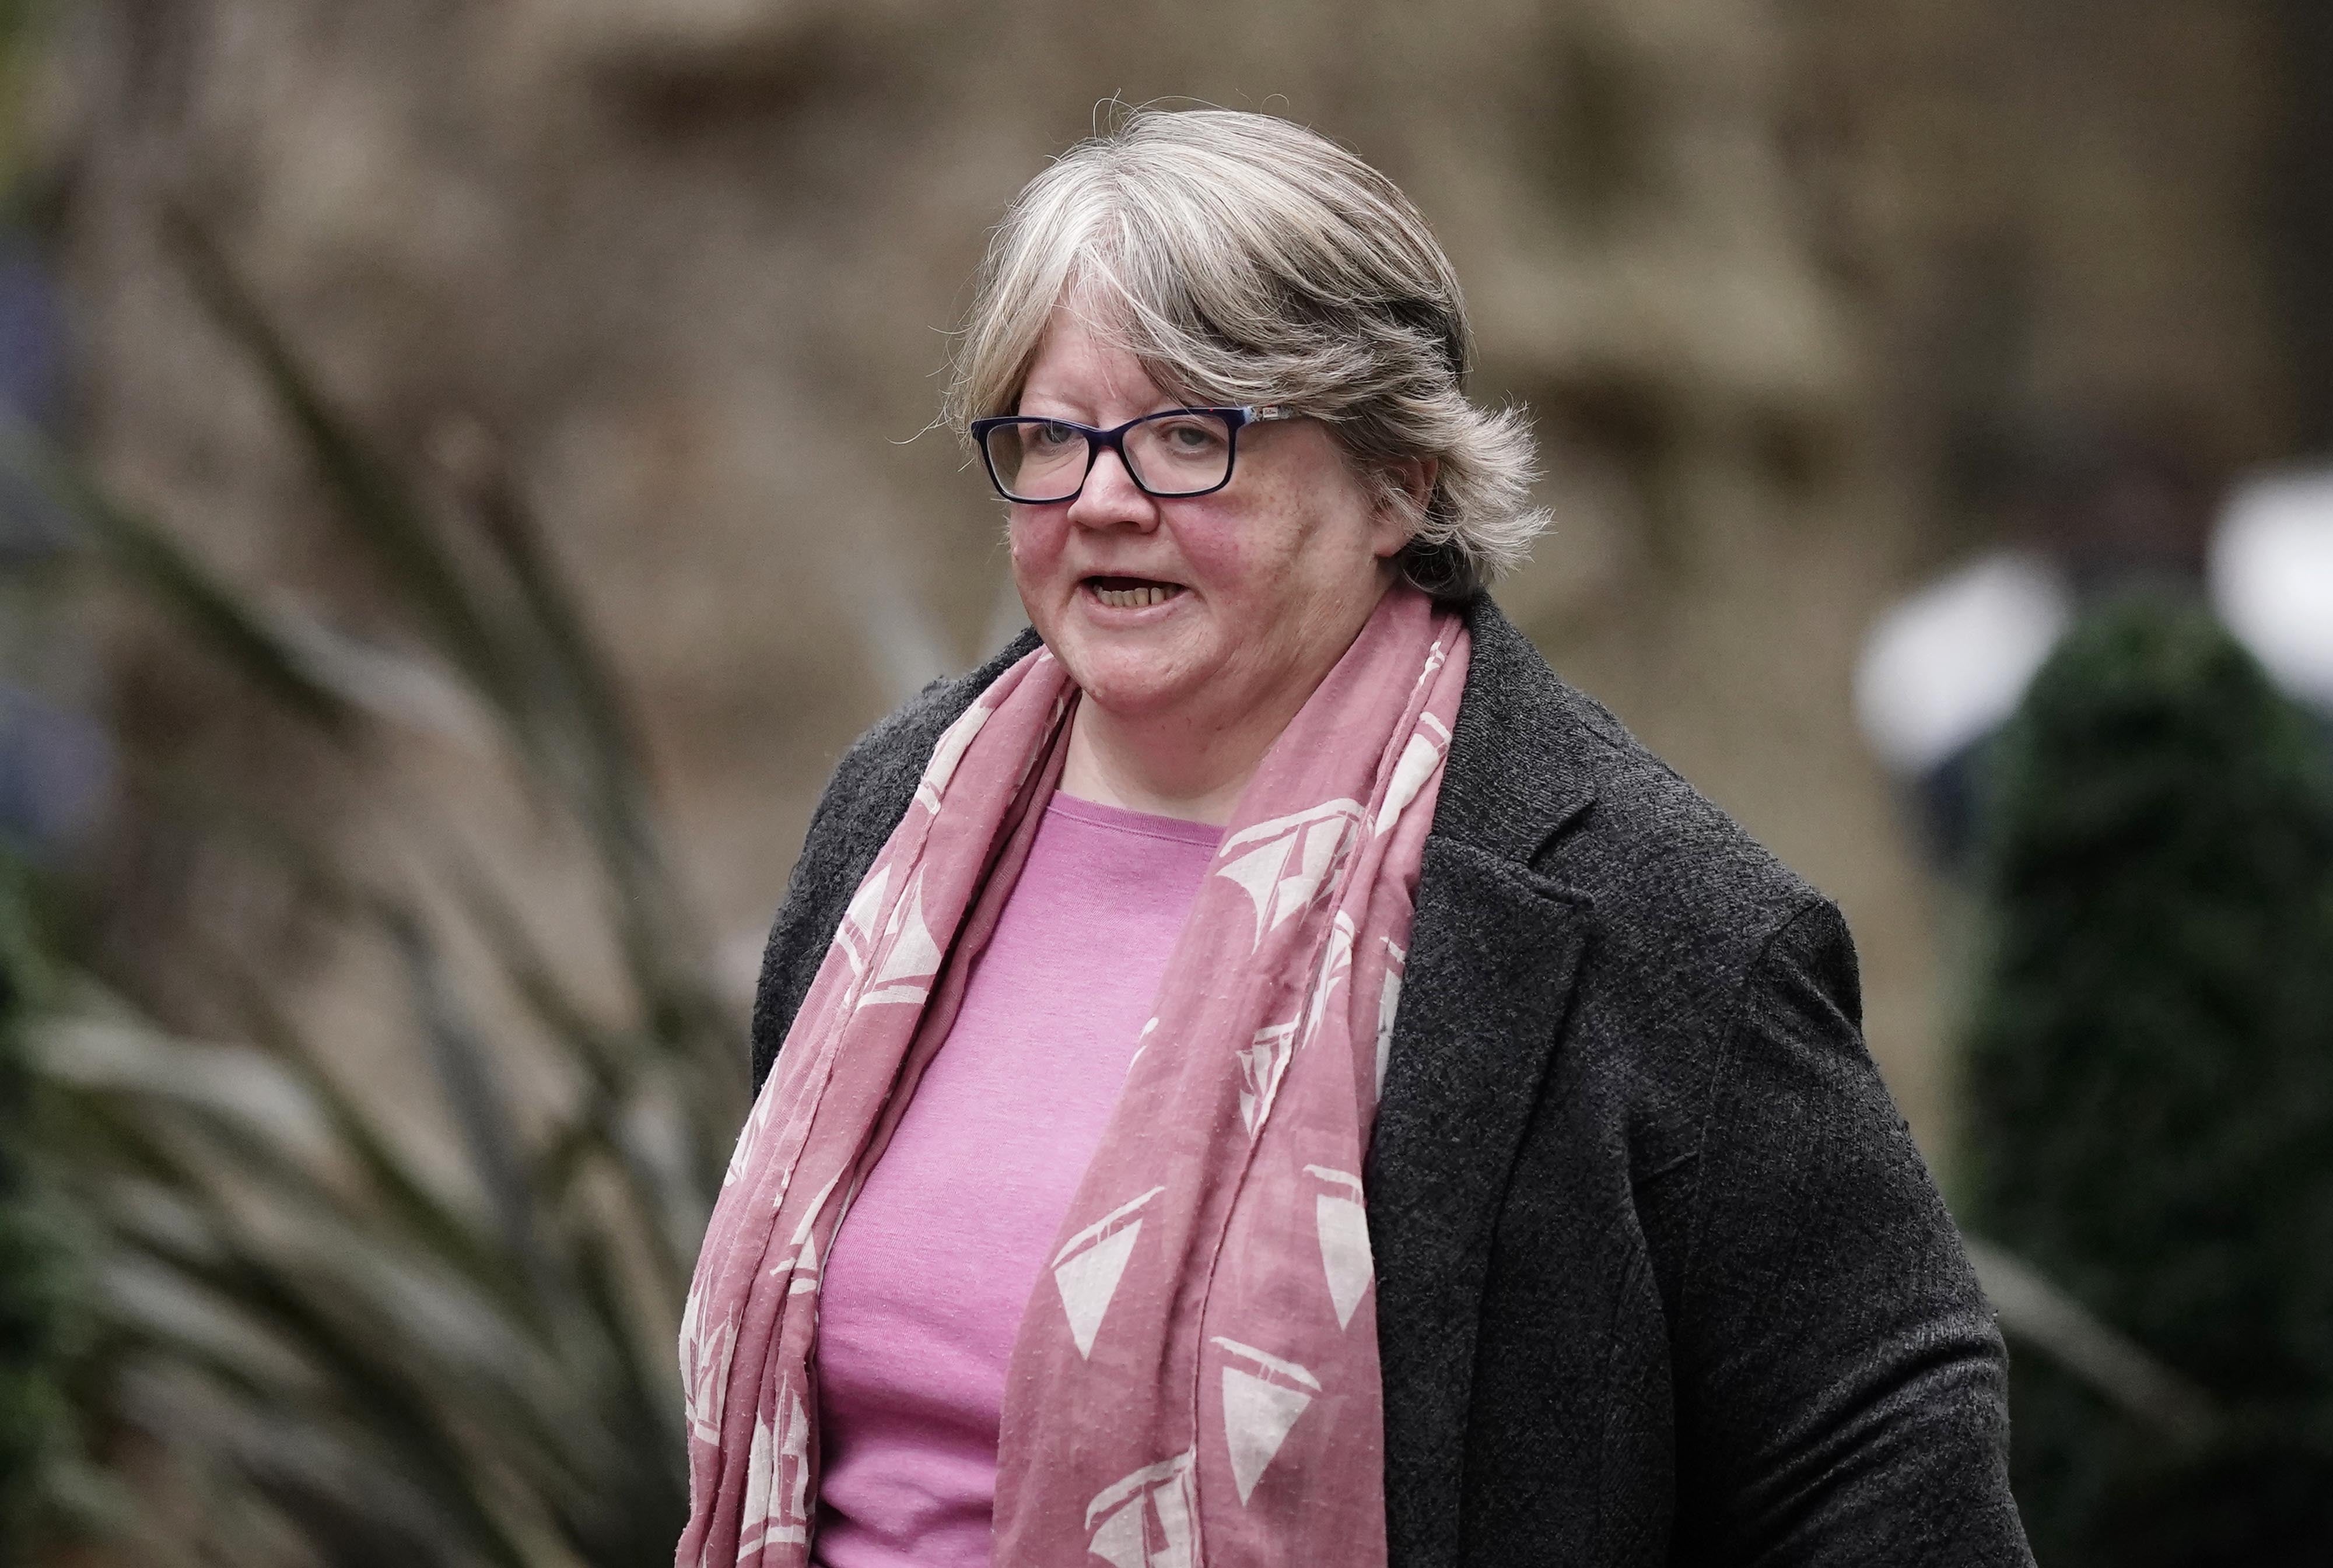 The work and pensions secretary, Therese Coffey